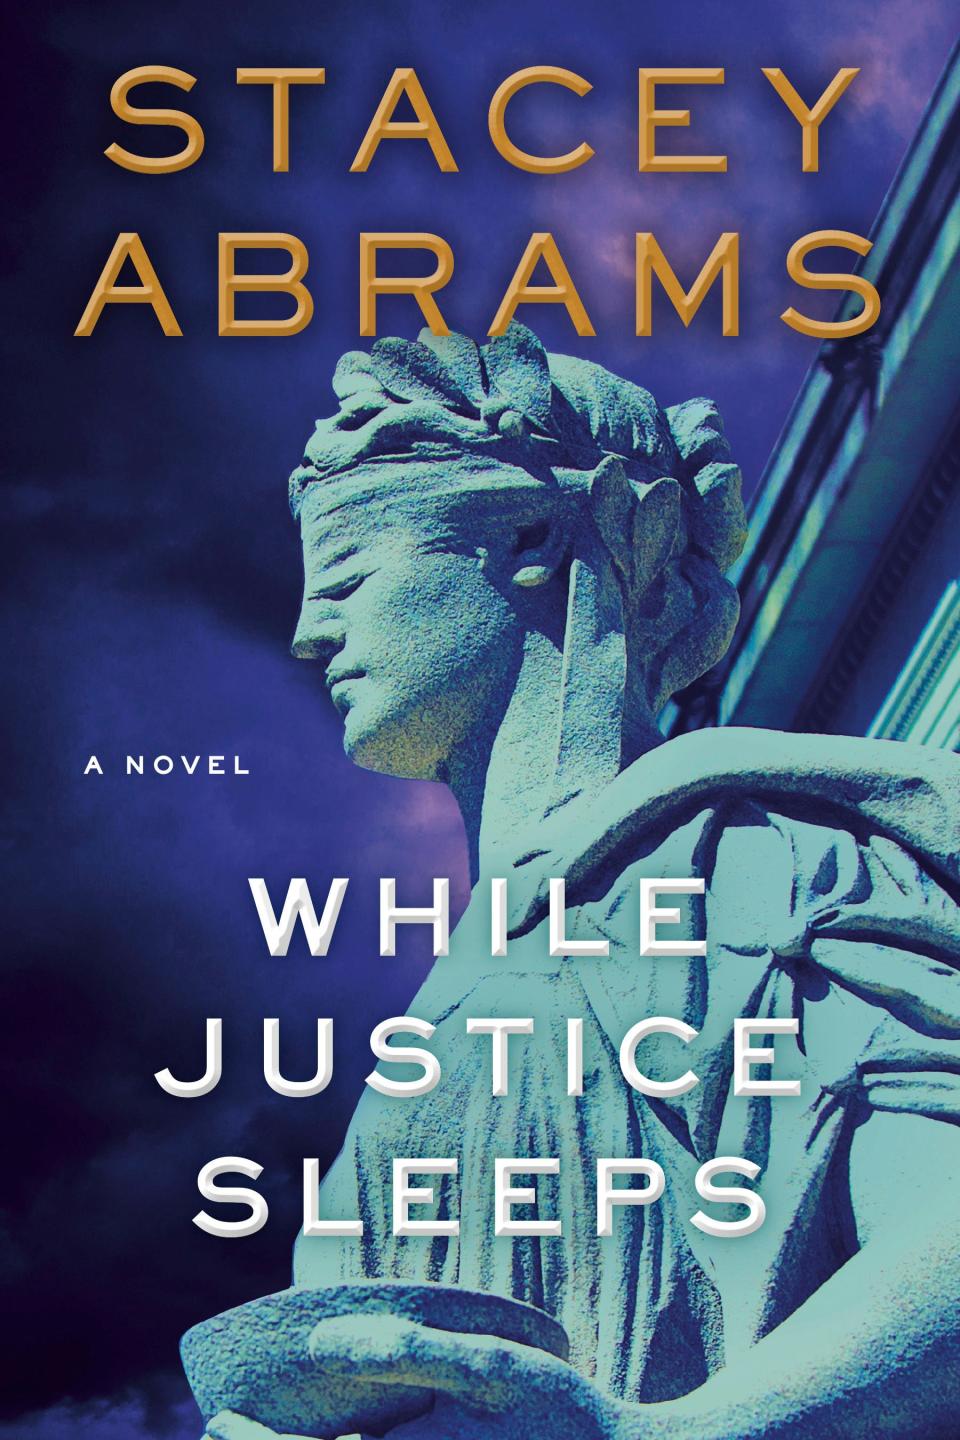 This image released by Doubleday shows “While Justice Sleeps,” a novel by Stacey Abrams.